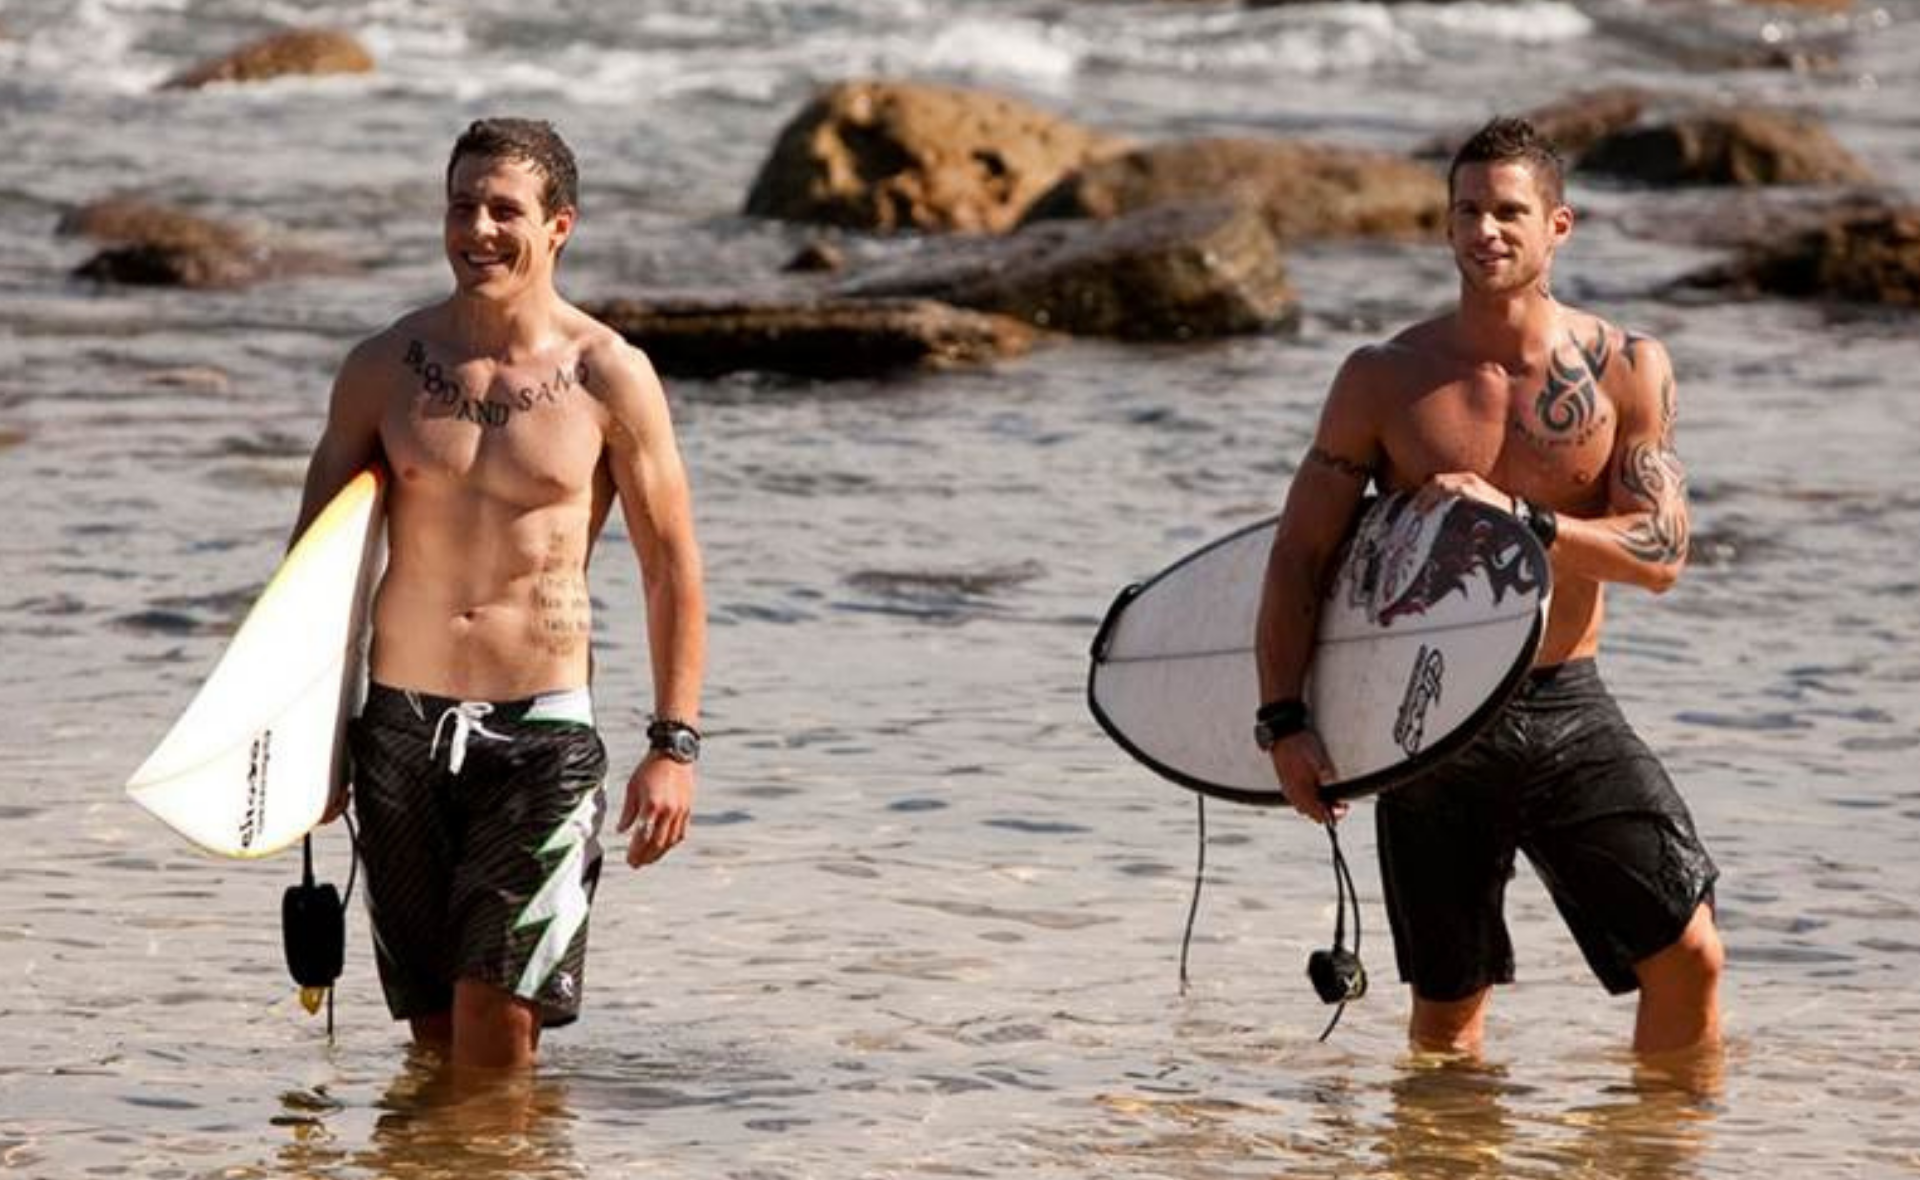 One Braxton may be back but Steve Peacocke won’t be returning to Home And Away